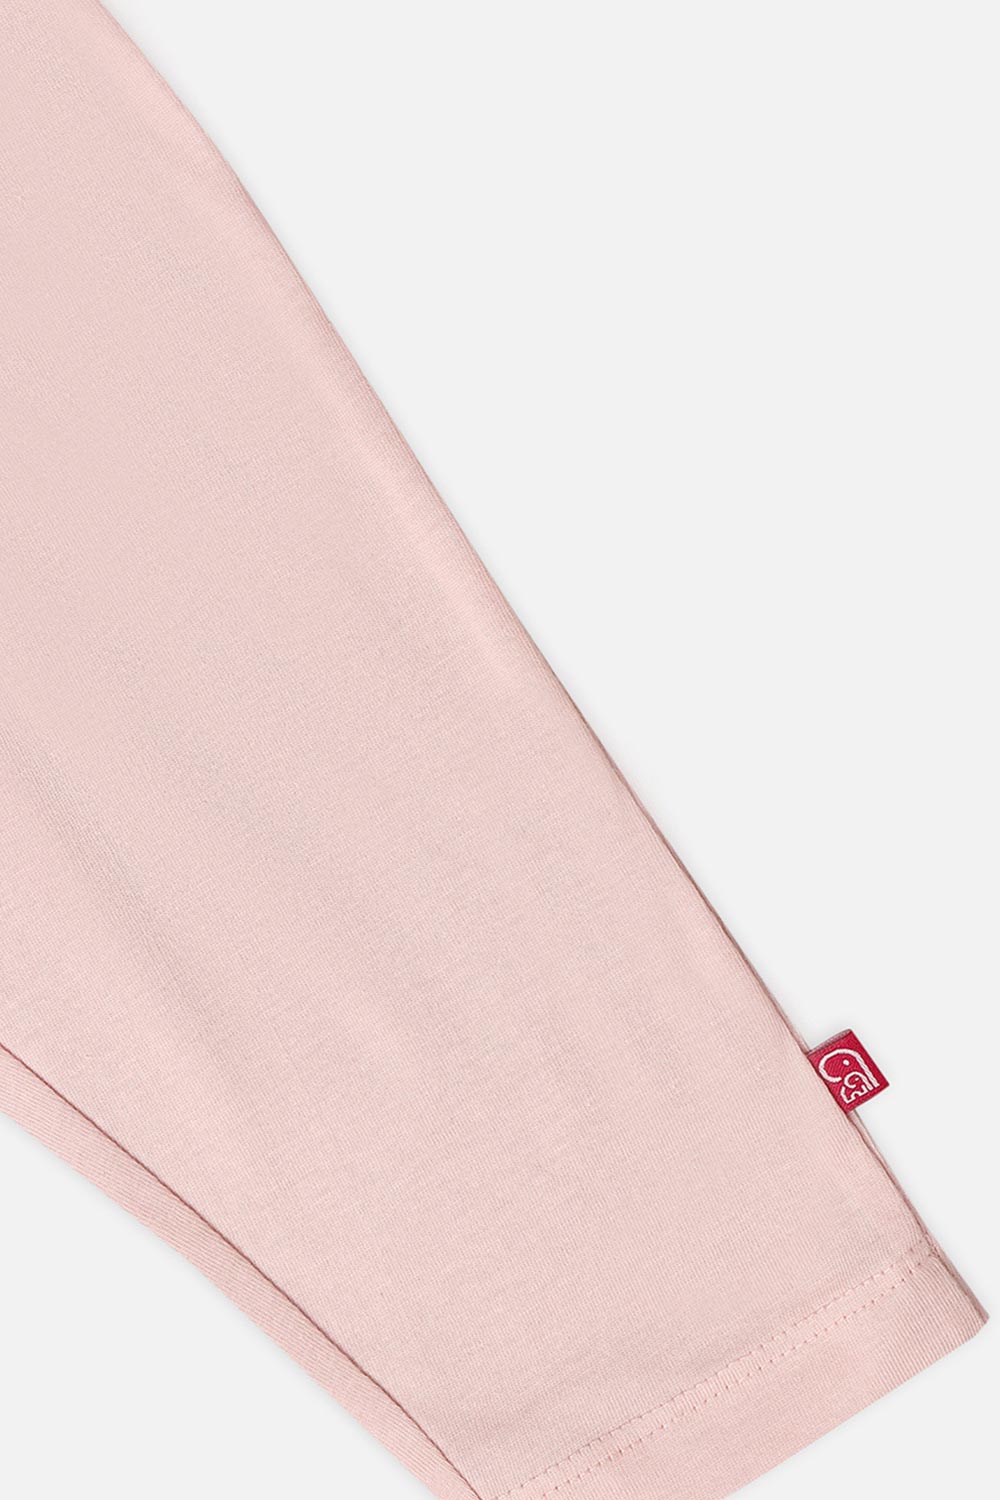 Oh Baby Comfy Pant Baby Pink-Tr08